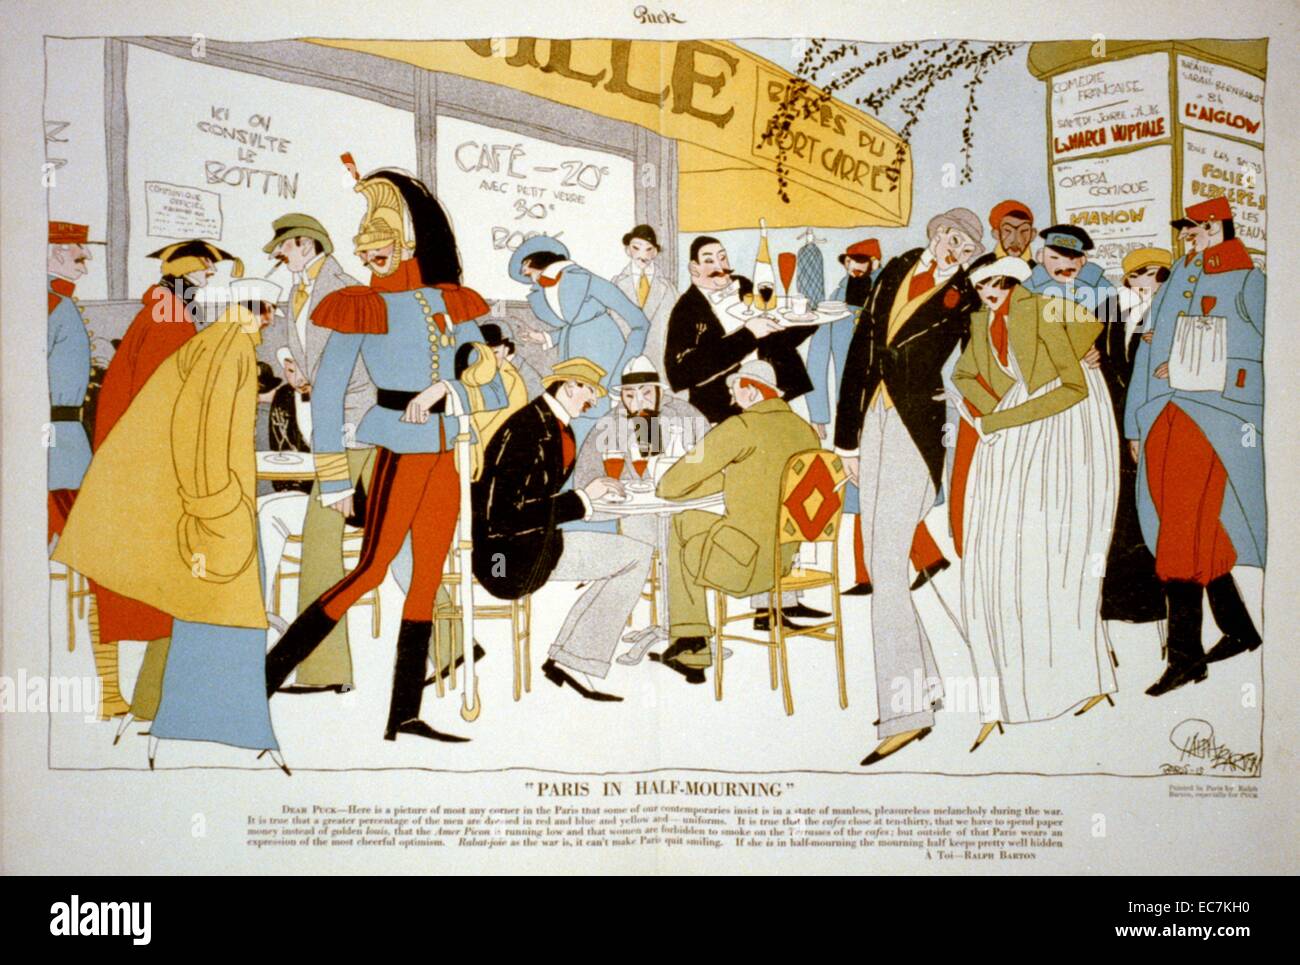 Paris in half-mourning. Caricature of fashionably dressed soldiers and other fashionably dressed people at an outdoor cafe in Paris during World War I. The caption underneath the image explains that although the effects of the war can be felt throughout Paris they are not enough to cause the Parisians to stop smiling. Stock Photo